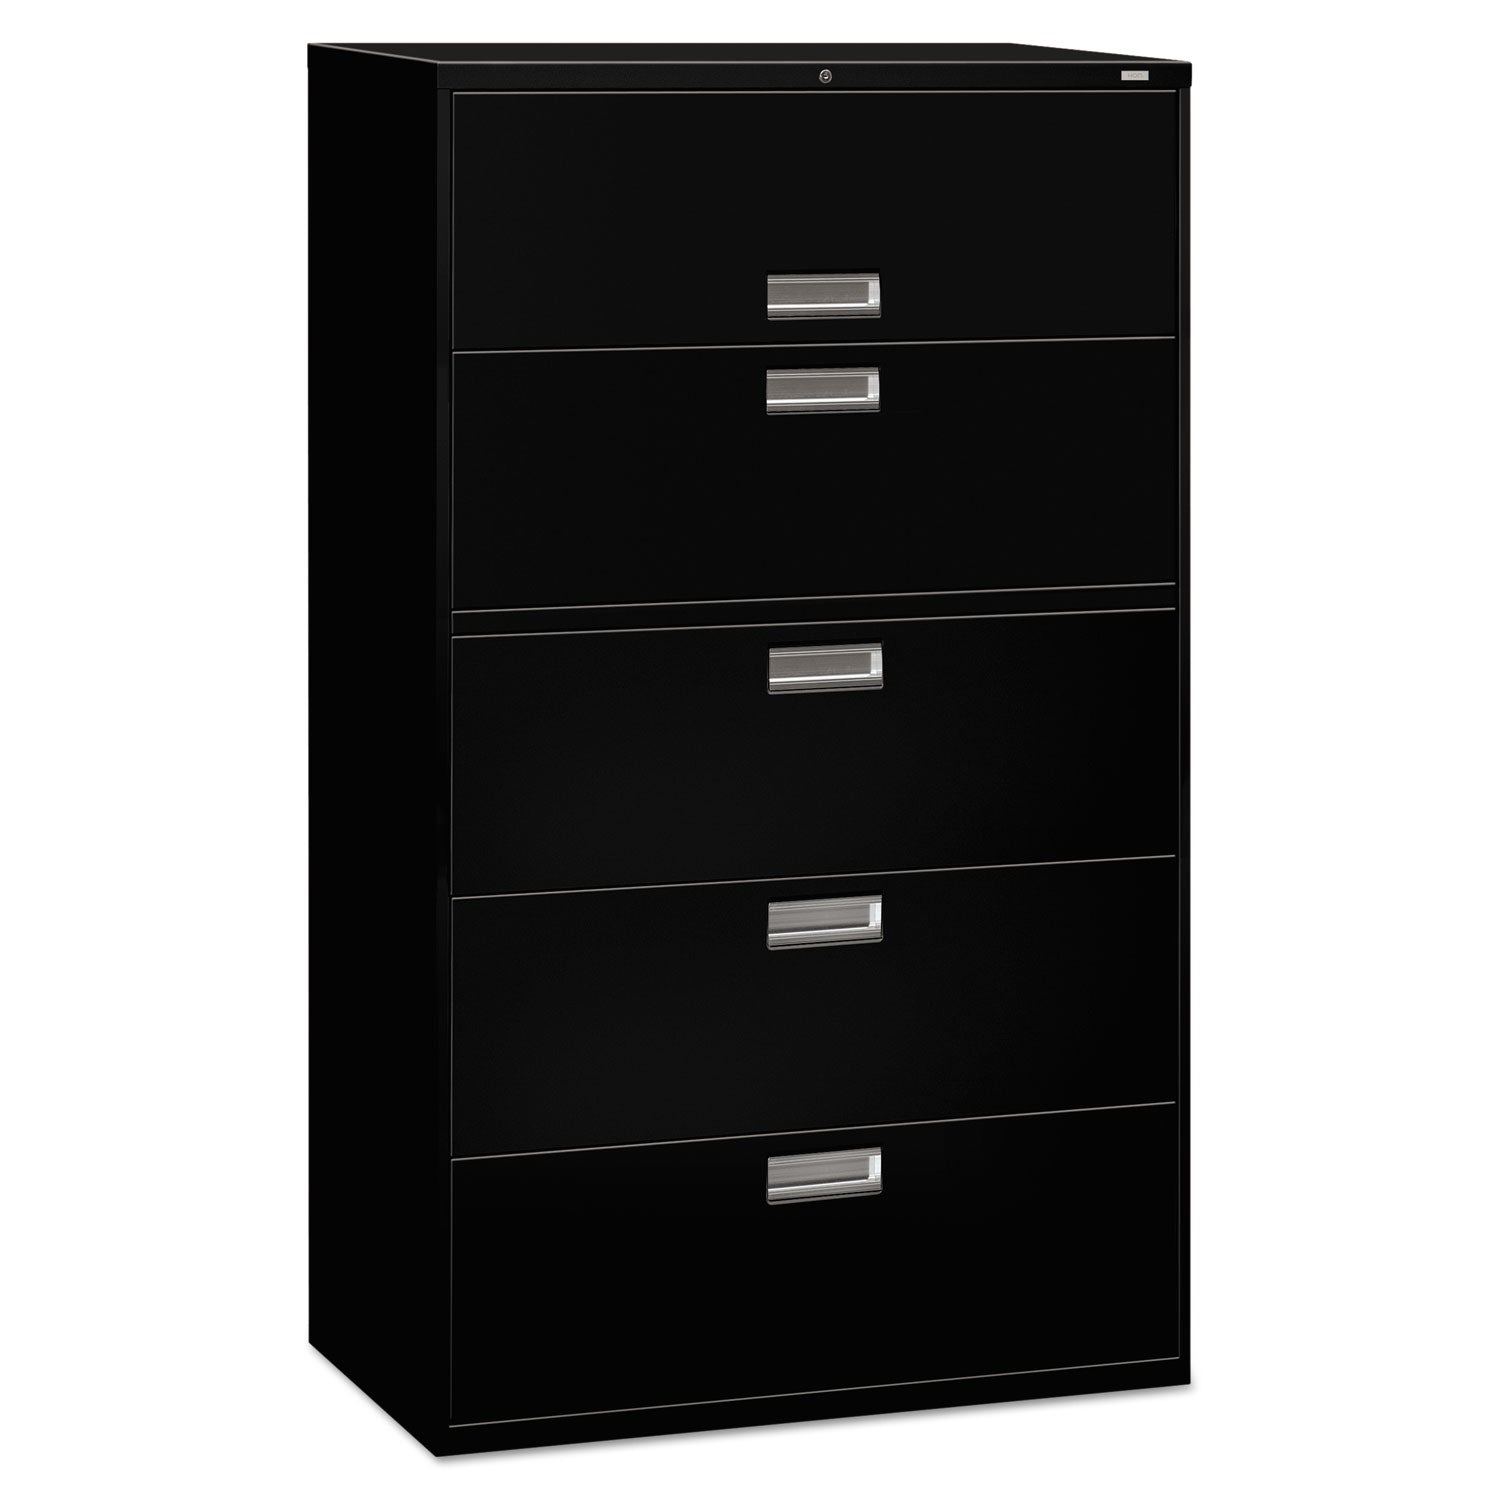 Brigade 600 Series Lateral File, 4 Legal/Letter-Size File Drawers, 1 Roll-Out File Shelf, Black, 42" x 18" x 64.25 - 